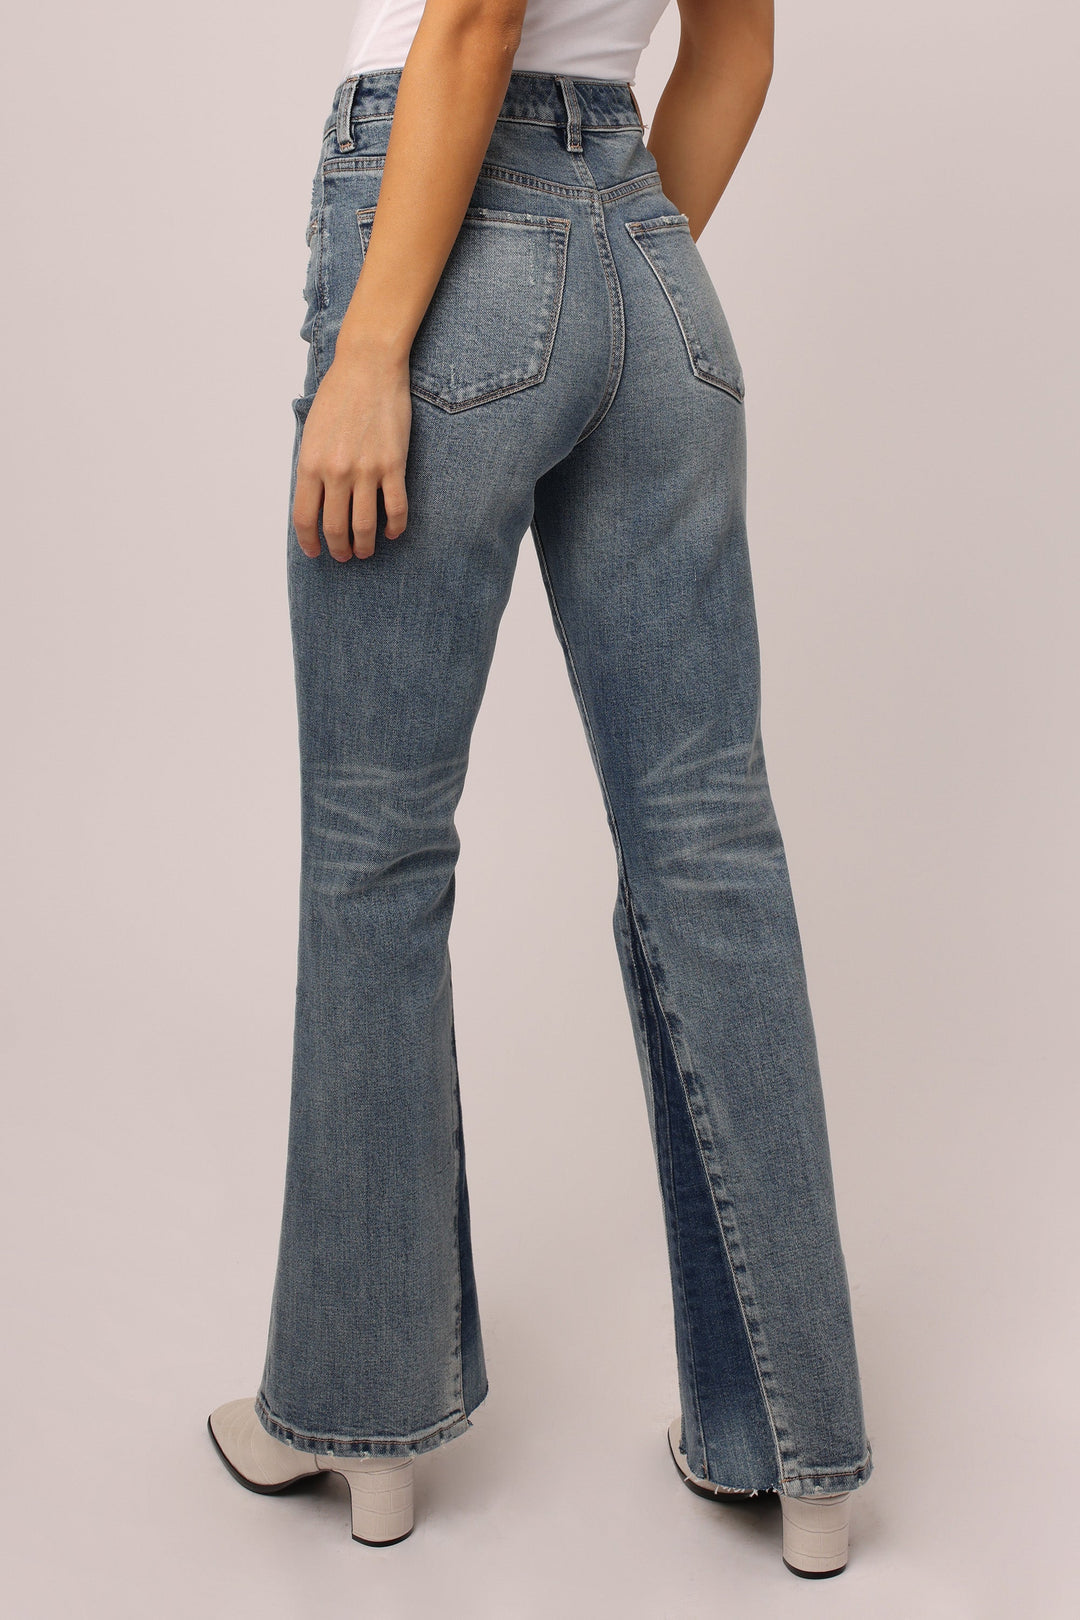 image of a female model wearing a OLIVER SUPER HIGH RISE BOOTCUT JEANS PRAGUE JEANS